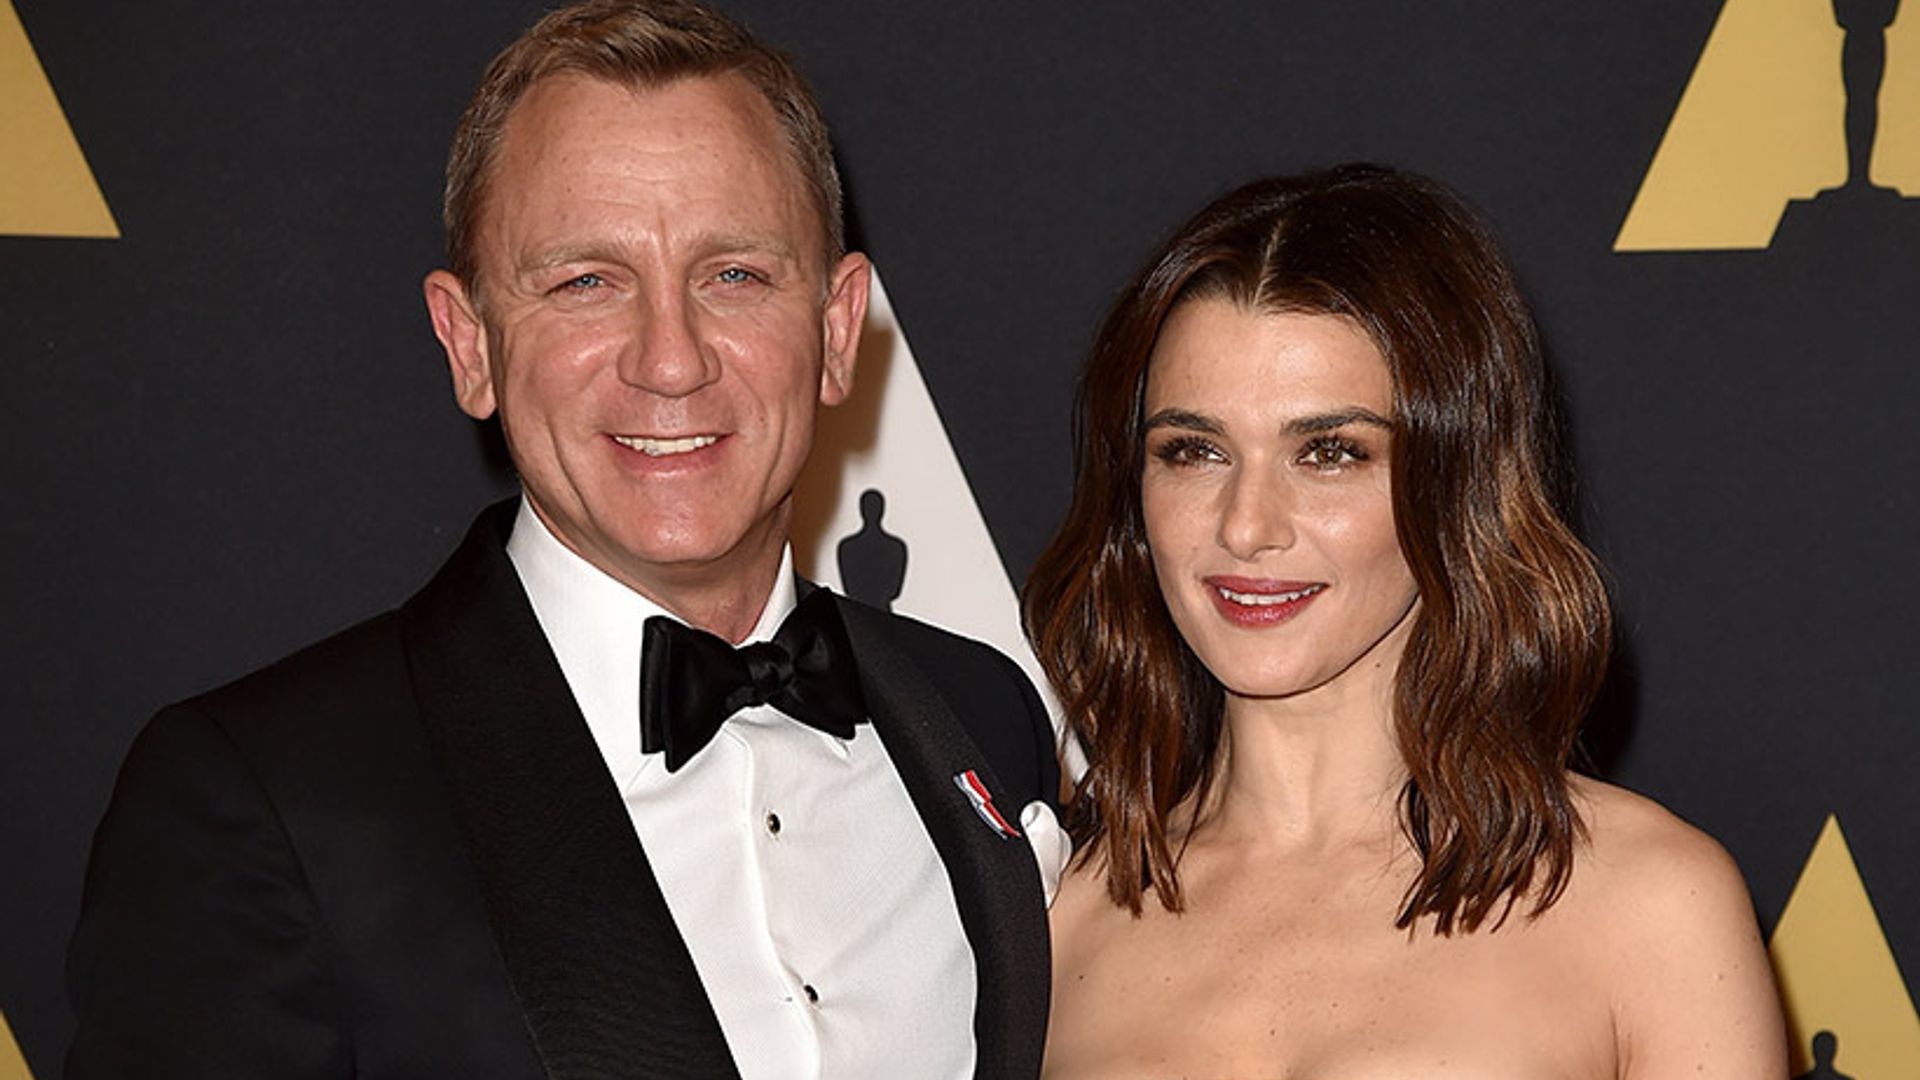 Rachel Weisz, 48, and Daniel Craig 50, expecting first baby together